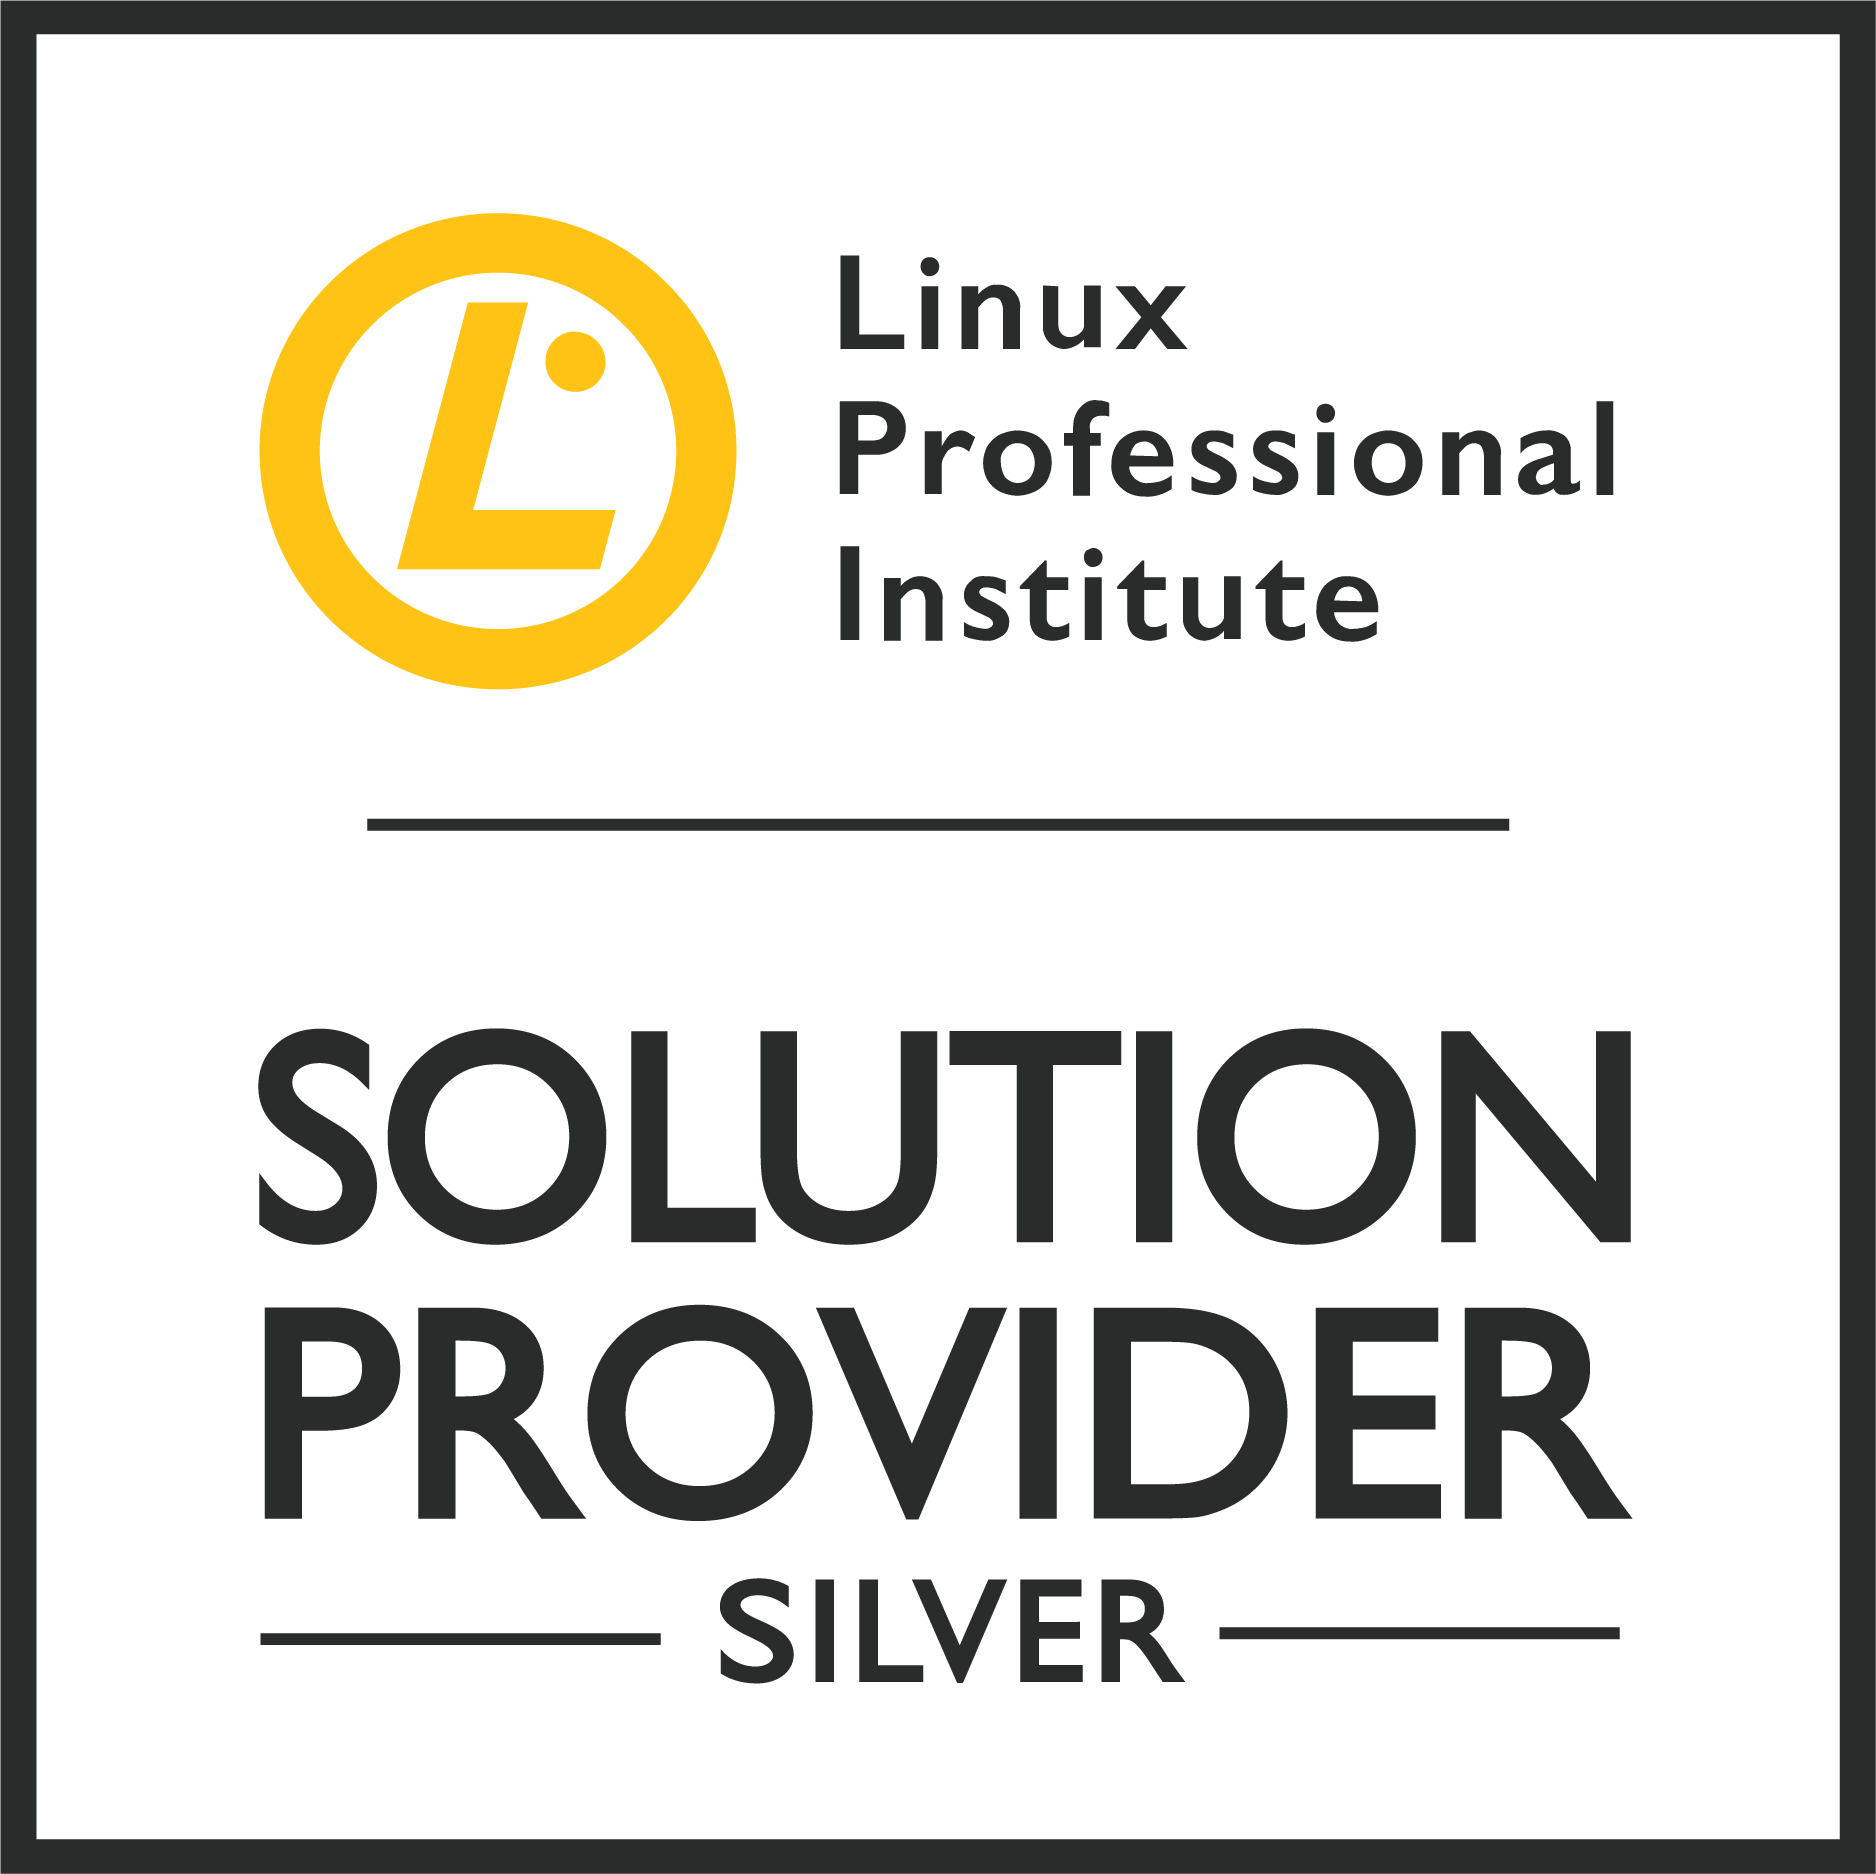 Linux Professional Institute - Solution Provider Silver